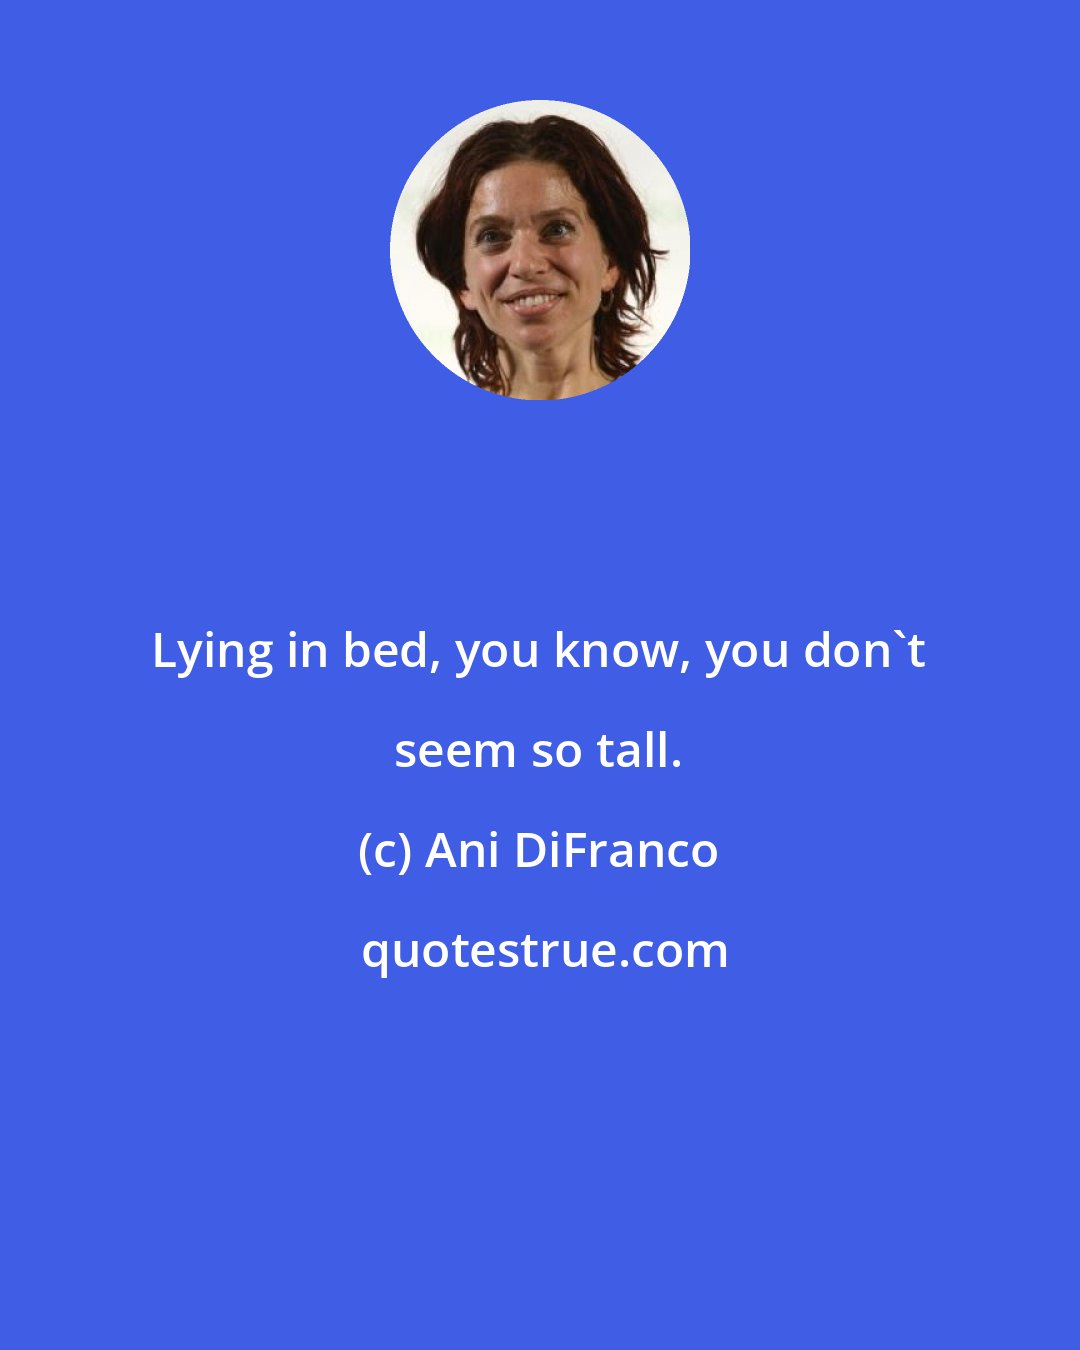 Ani DiFranco: Lying in bed, you know, you don't seem so tall.